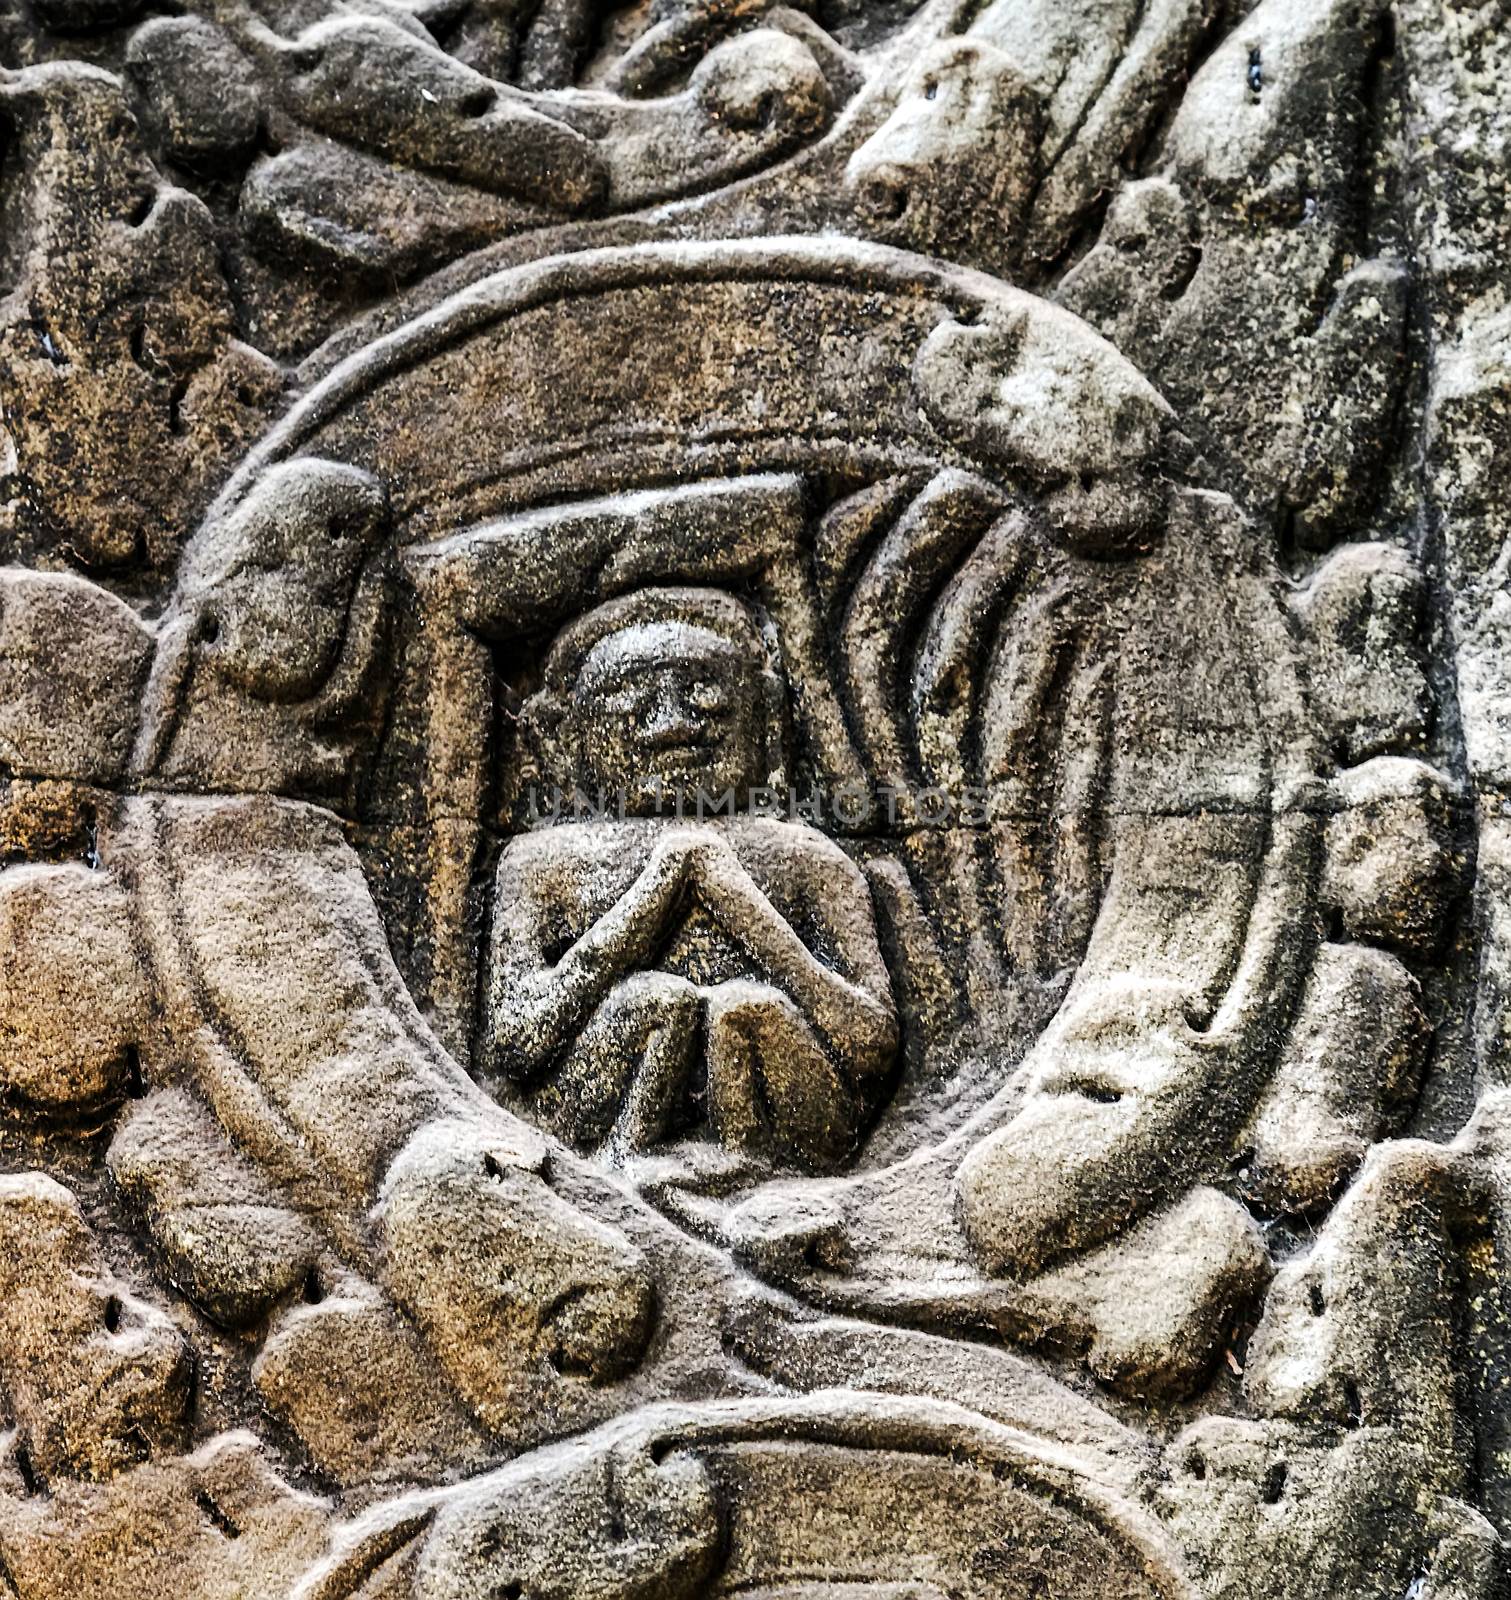 art of ancient Hindu god stone background, detail of the architecture in Bantey Srei temple in the Angkor area, Cambodia.